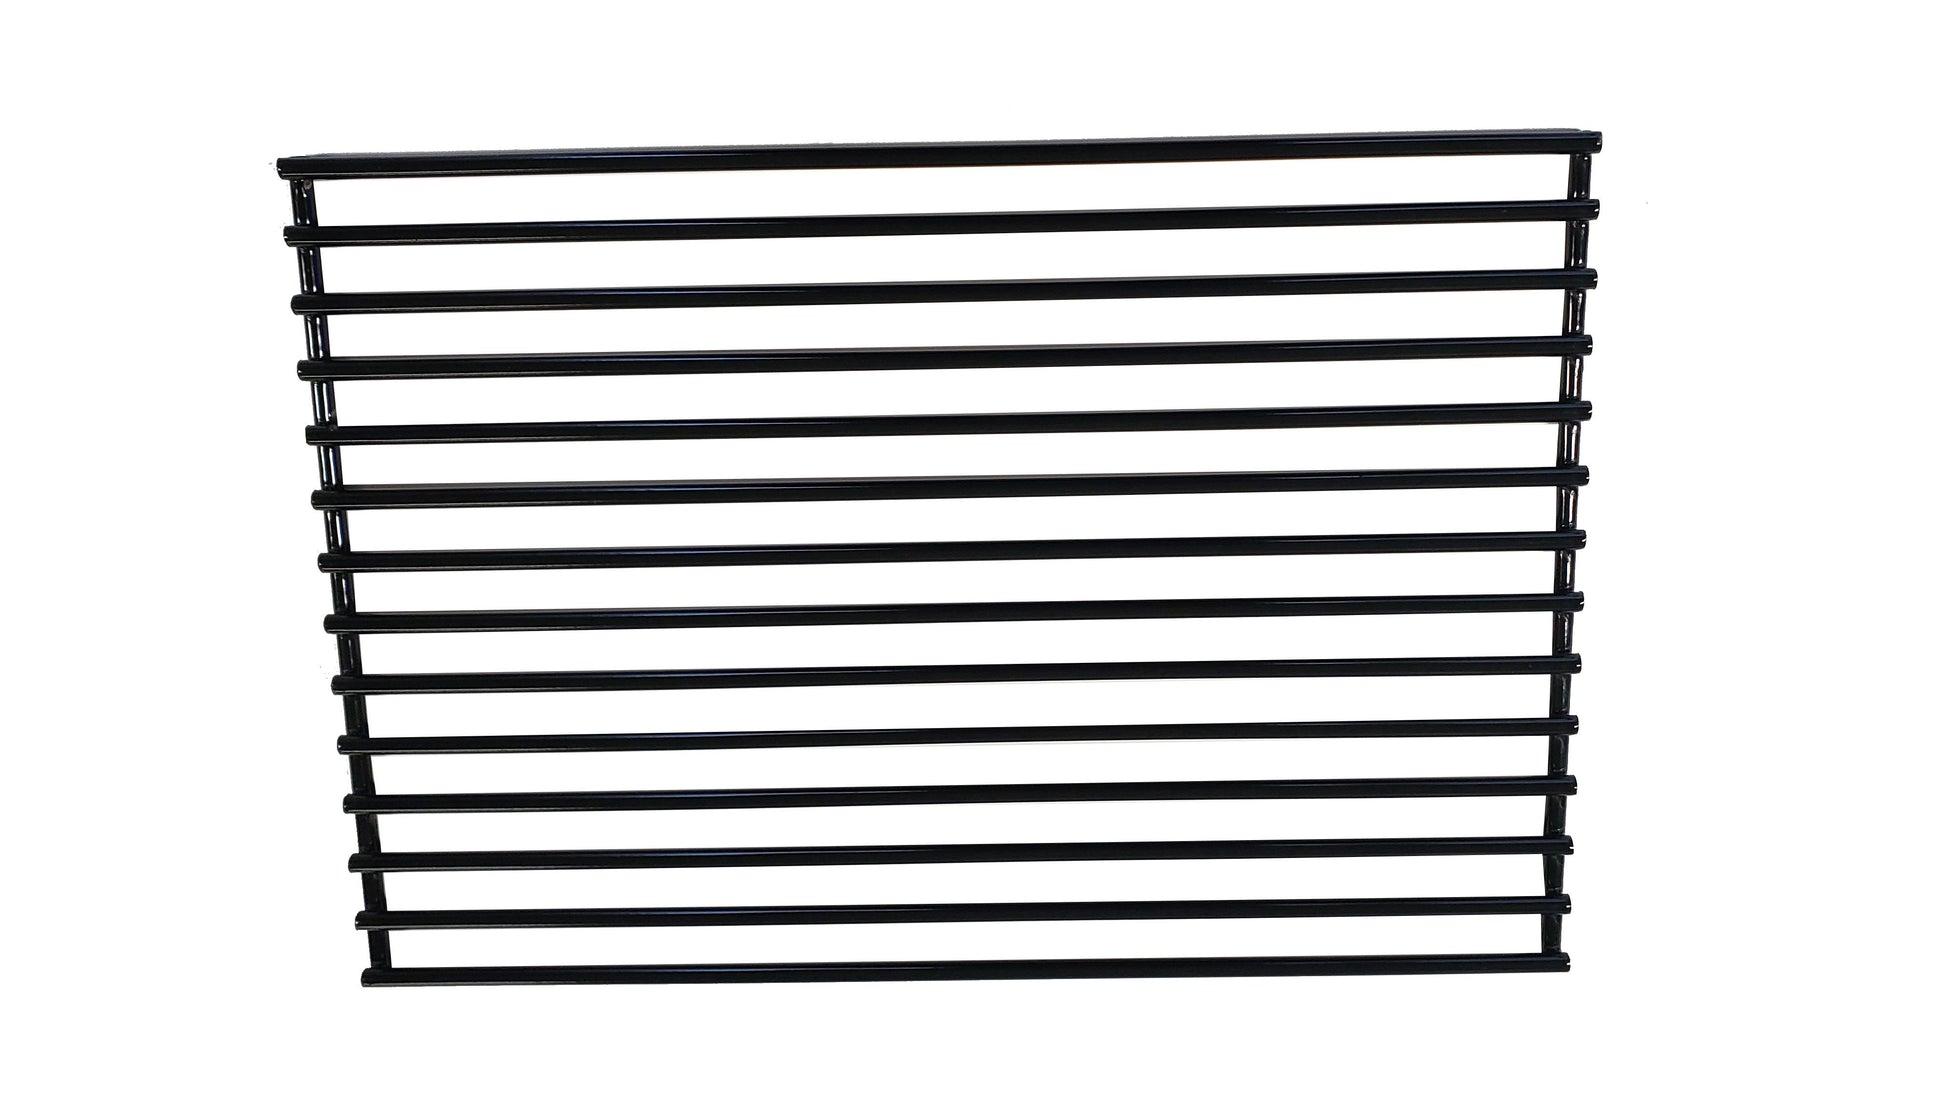 Broil King 10225T423 porcelain coated cooking grid.  Don’t put off that spring or fall cleaning any longer and get your unit grilling like new again. Available to order at Barbecues Galore: Burlington, Oakville, Etobicoke & Calgary.